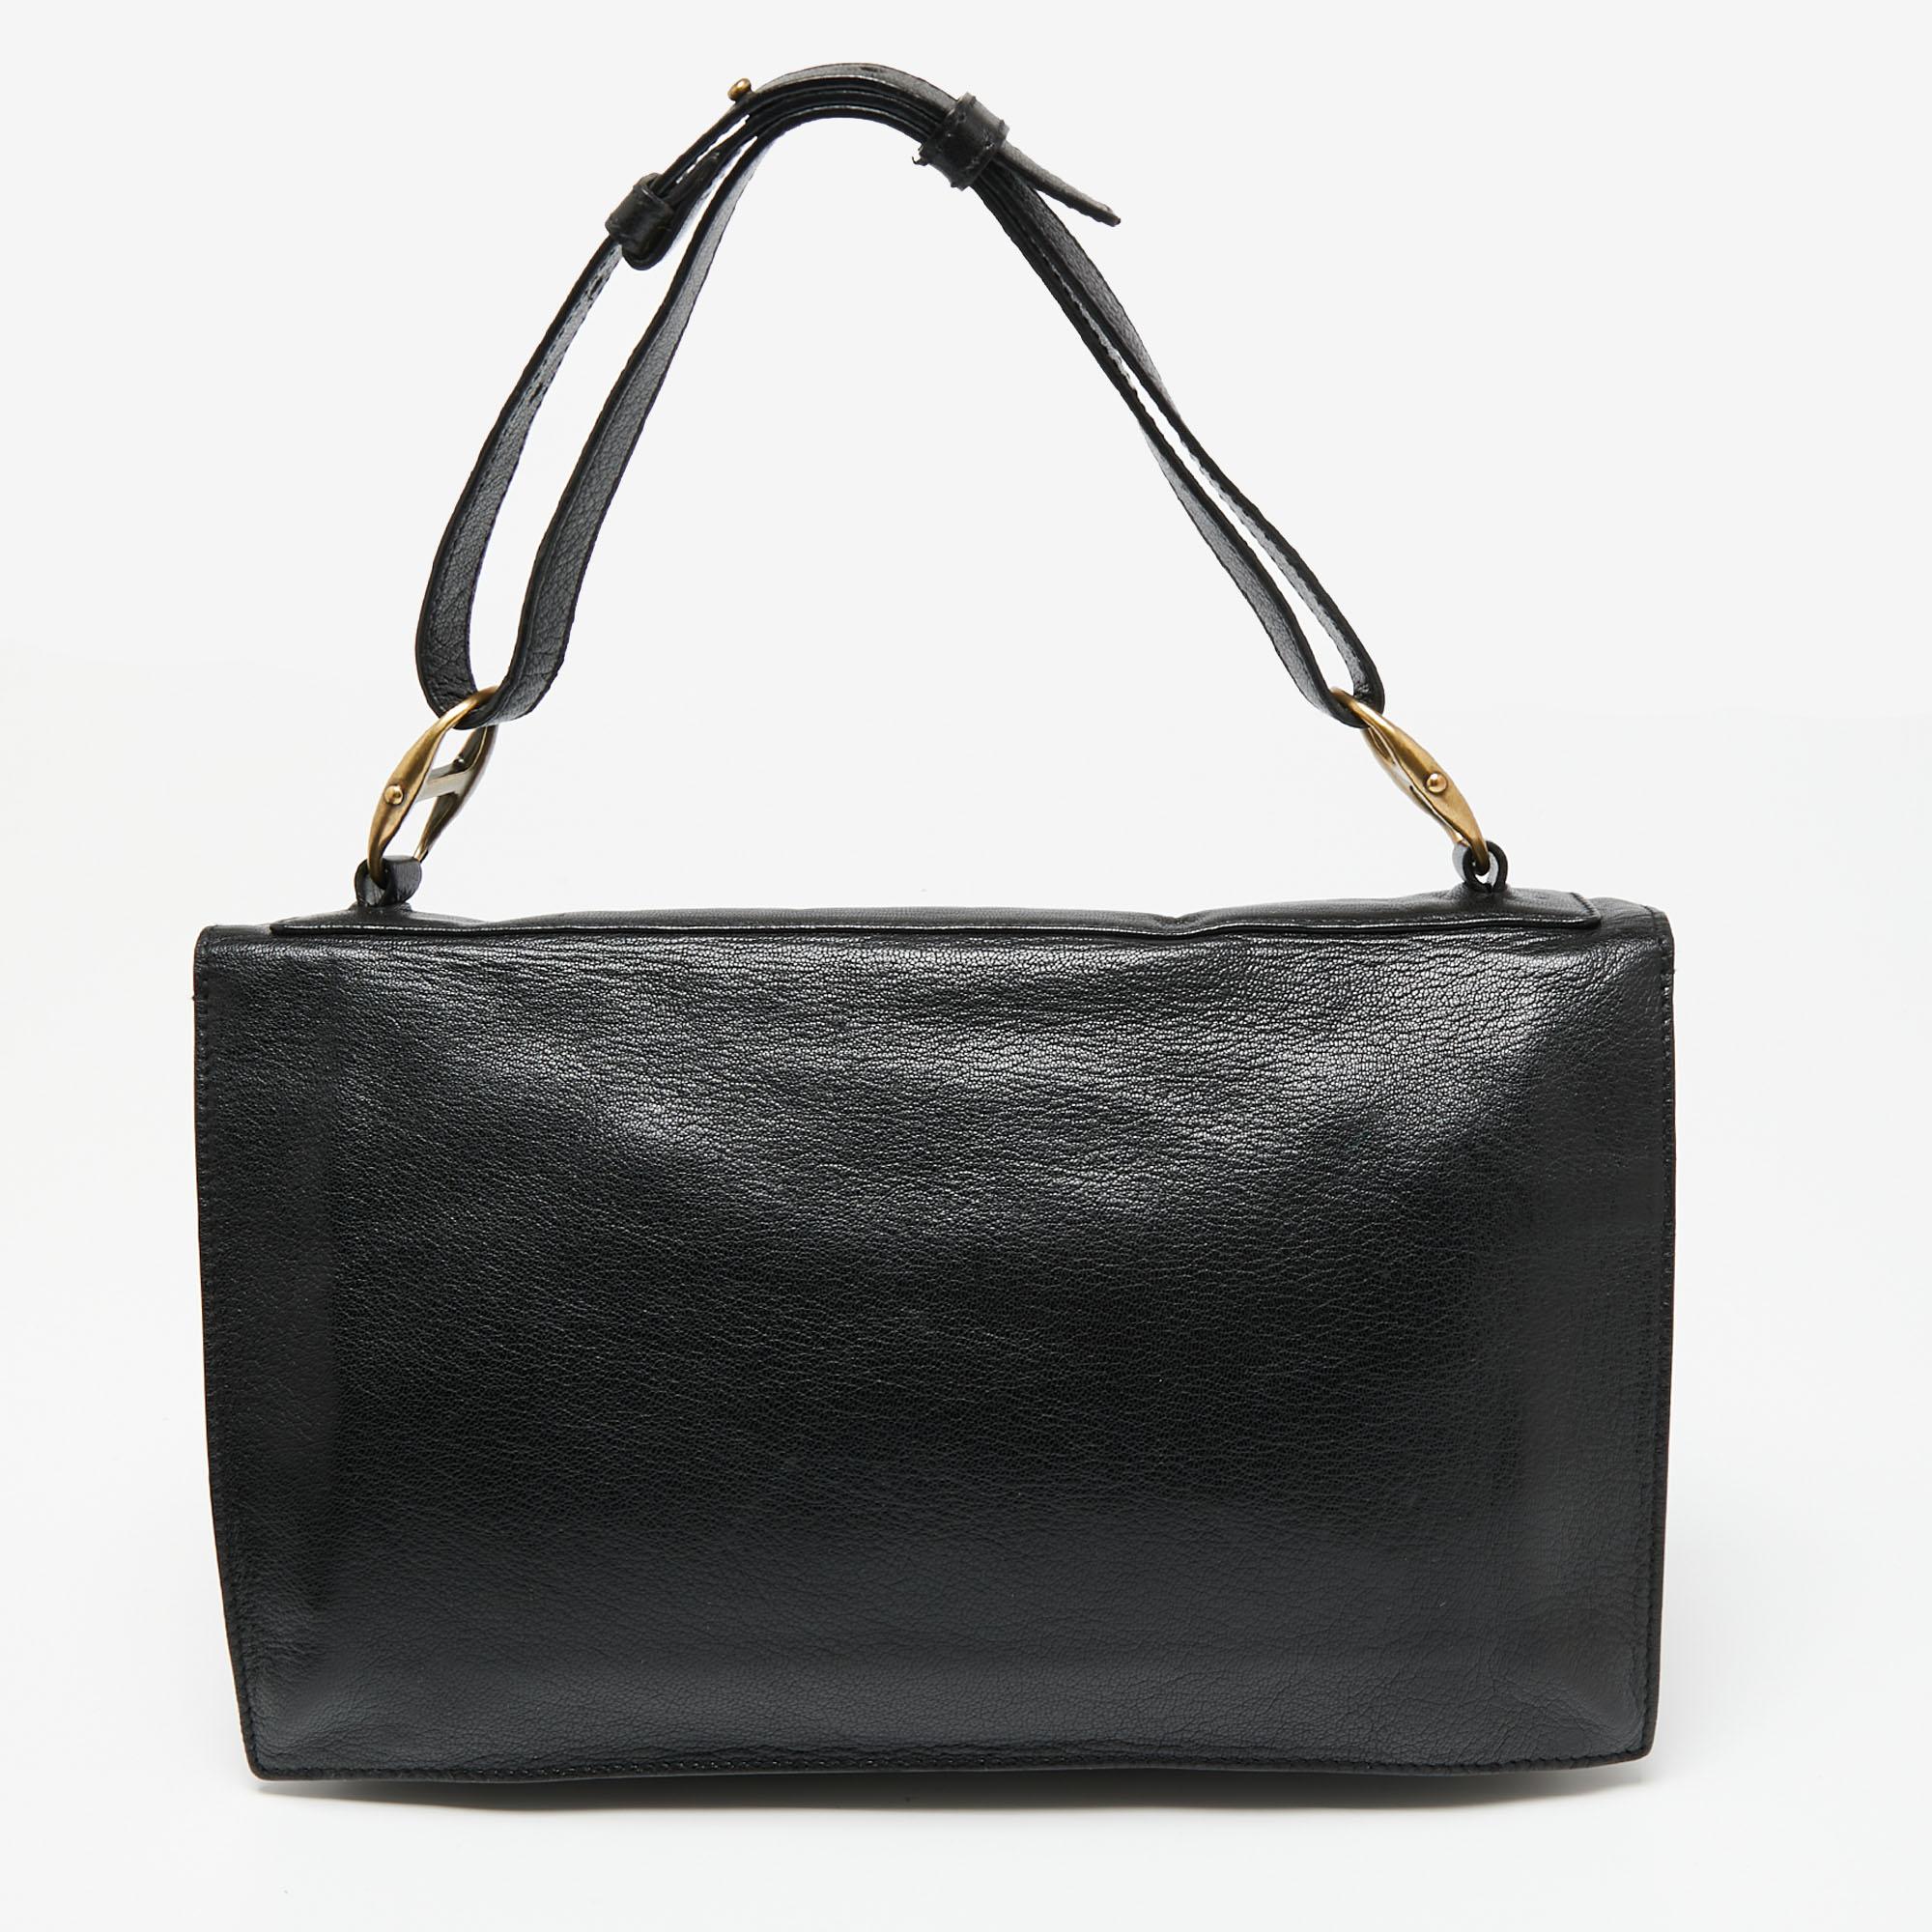 Due to the versatility of this Yves Saint Laurent bag, it will be your ultimate companion. Its front flap is added with a turnlock buckle and it is held by a short handle at the top. Made from leather, it features gold-tone hardware and a